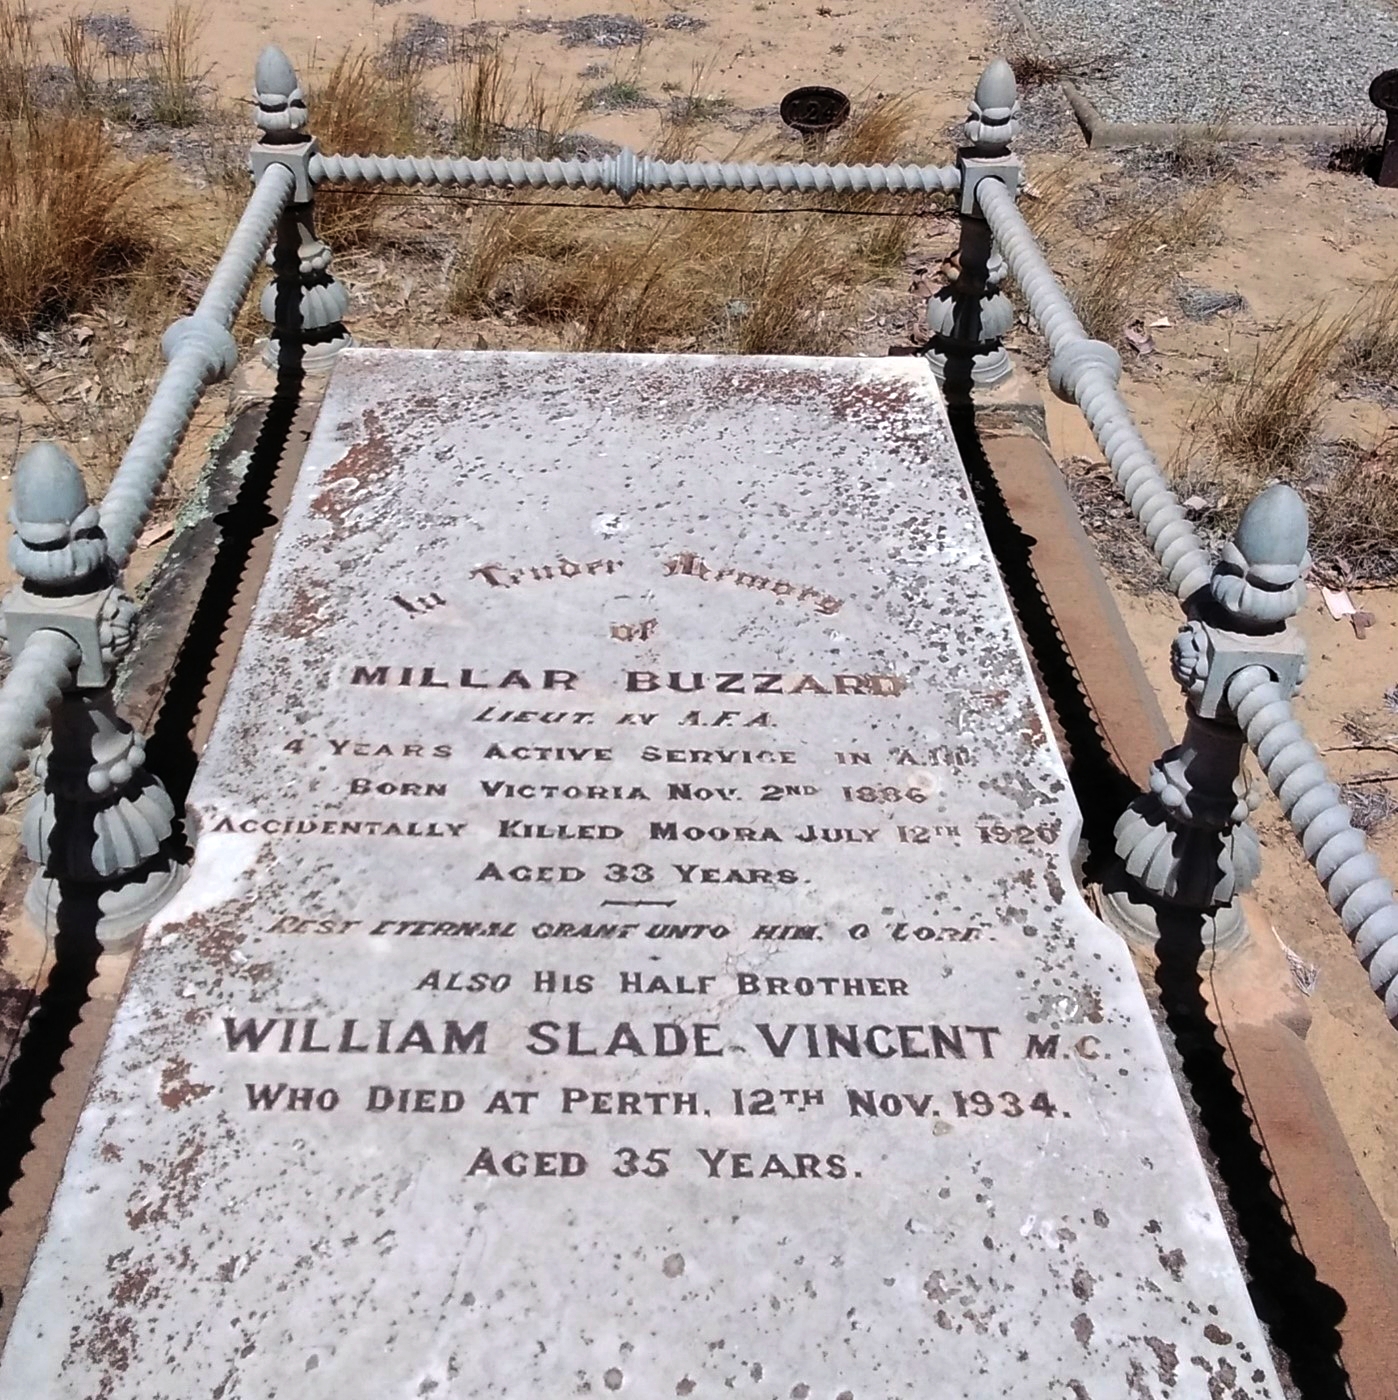 Millar Buzzard died at Moora on 12th July 1920, aged 33, and William Slade Vincent M.C. who died at Perth on 12th November 1934, aged 35.